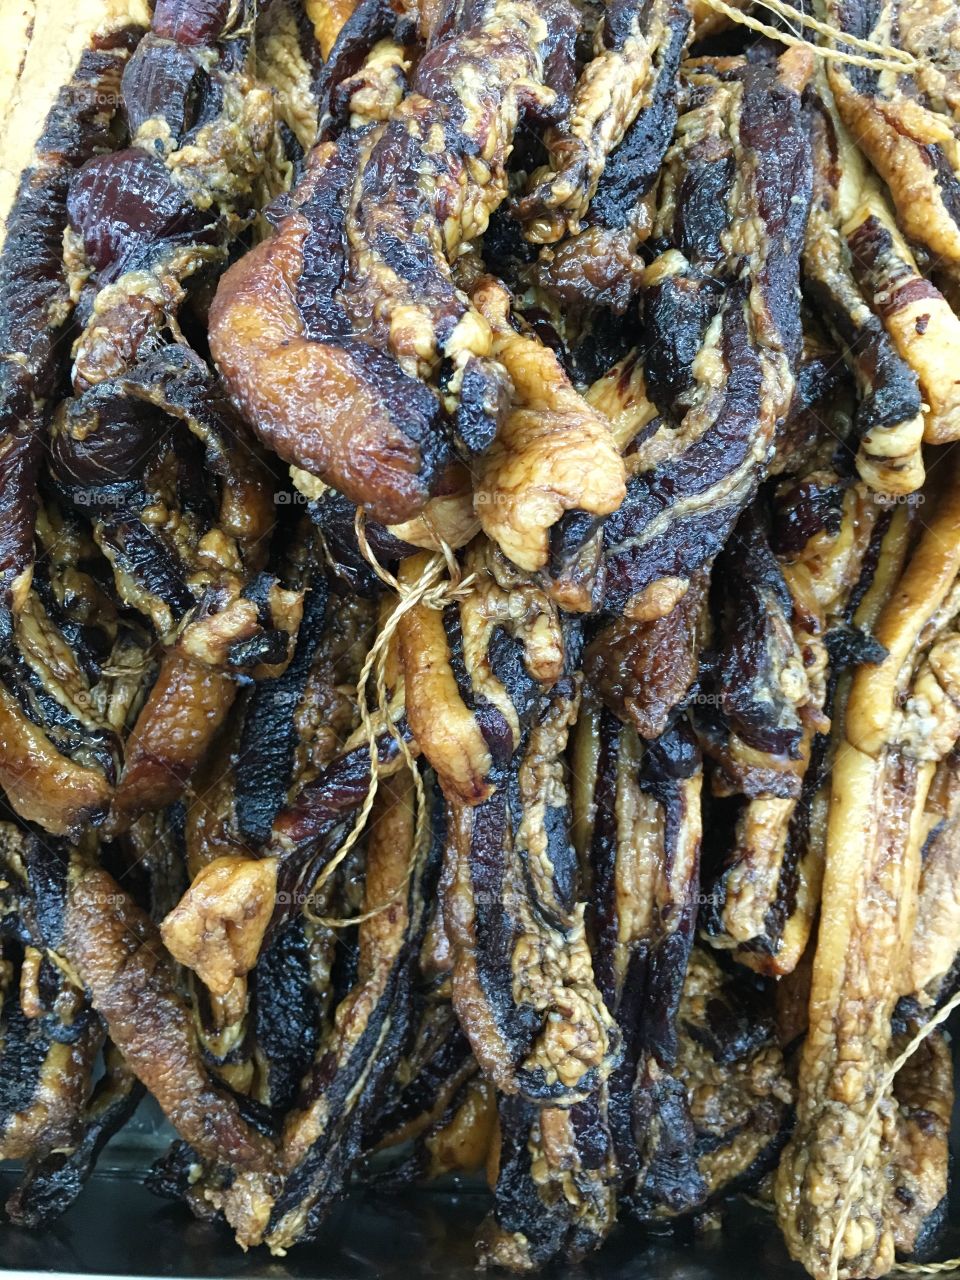 Dried Preserved Meat